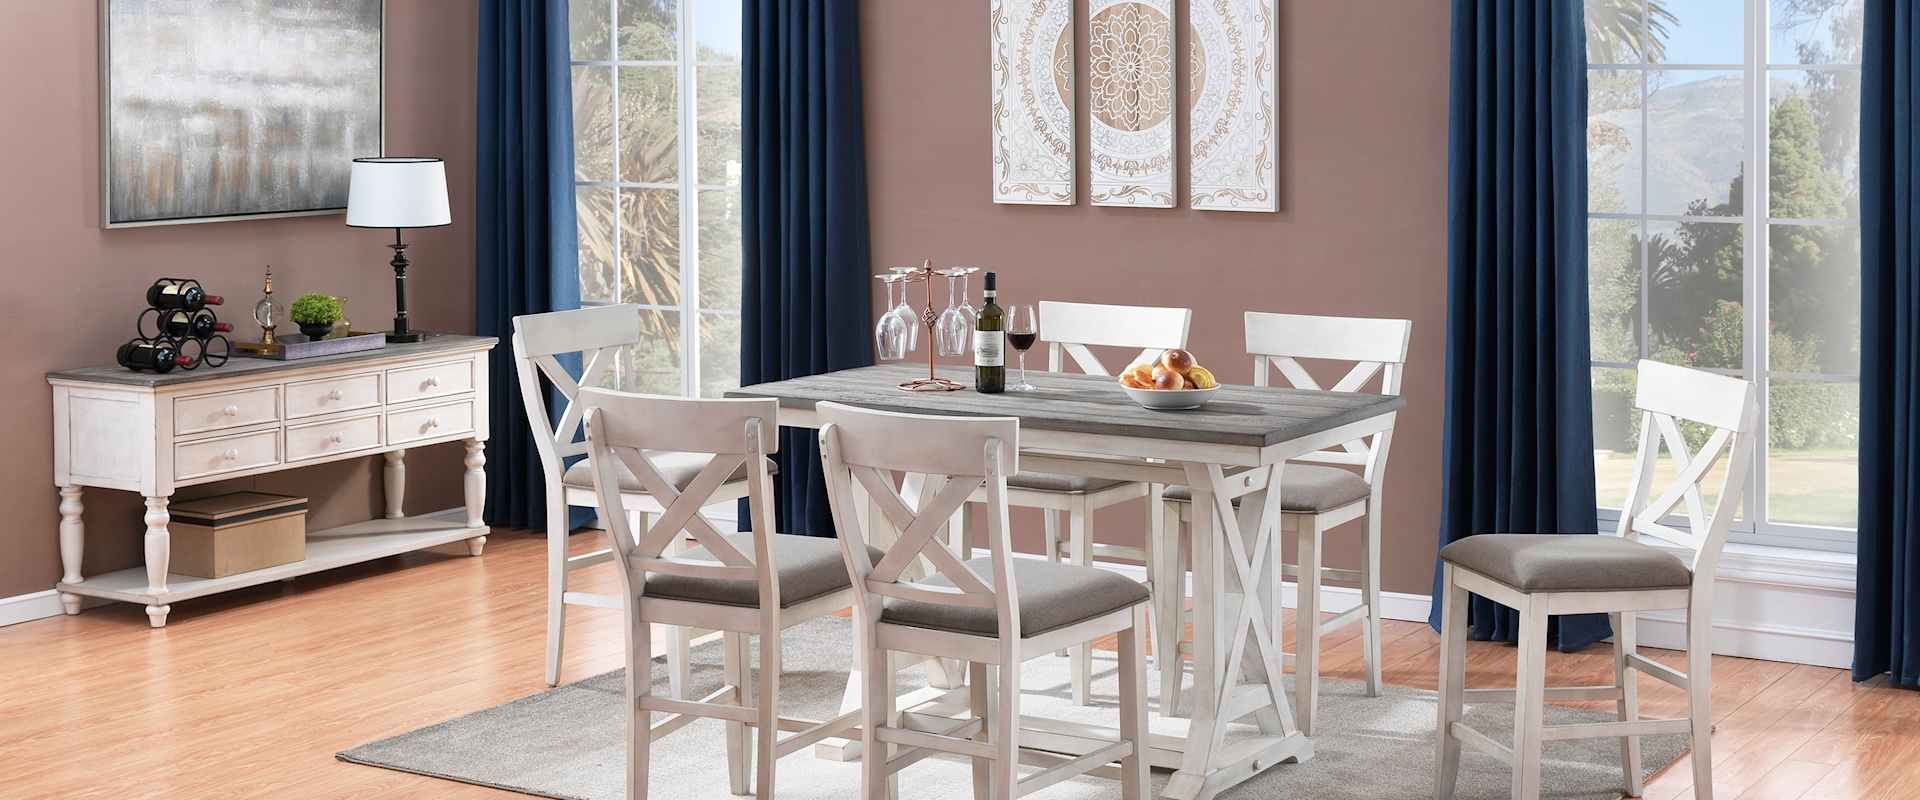 Farmhouse 7-Piece Counter-Height Dining Set